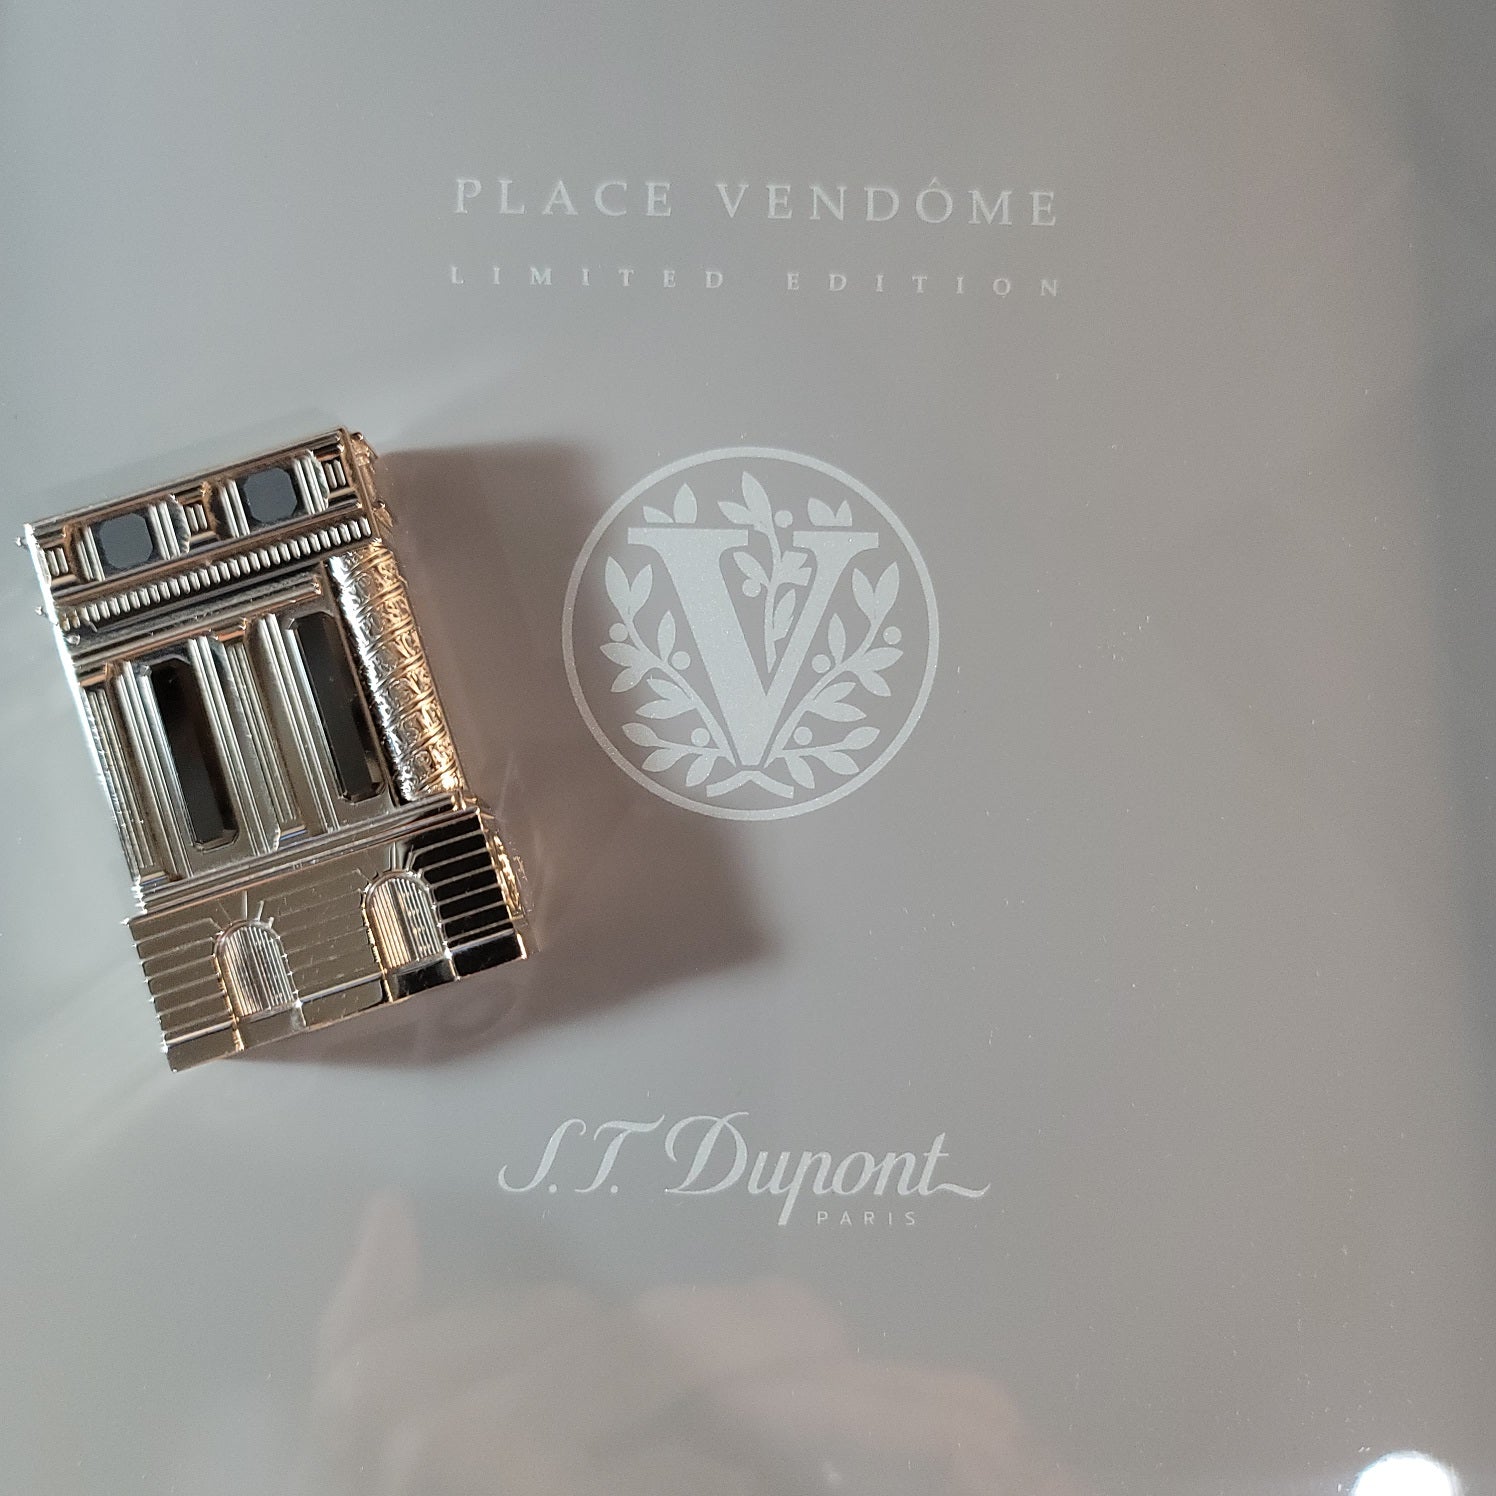 Exquisite S.T. Dupont Limited Edition No. 1349 Place Vendome Lighter New in Box | Peters Vaults